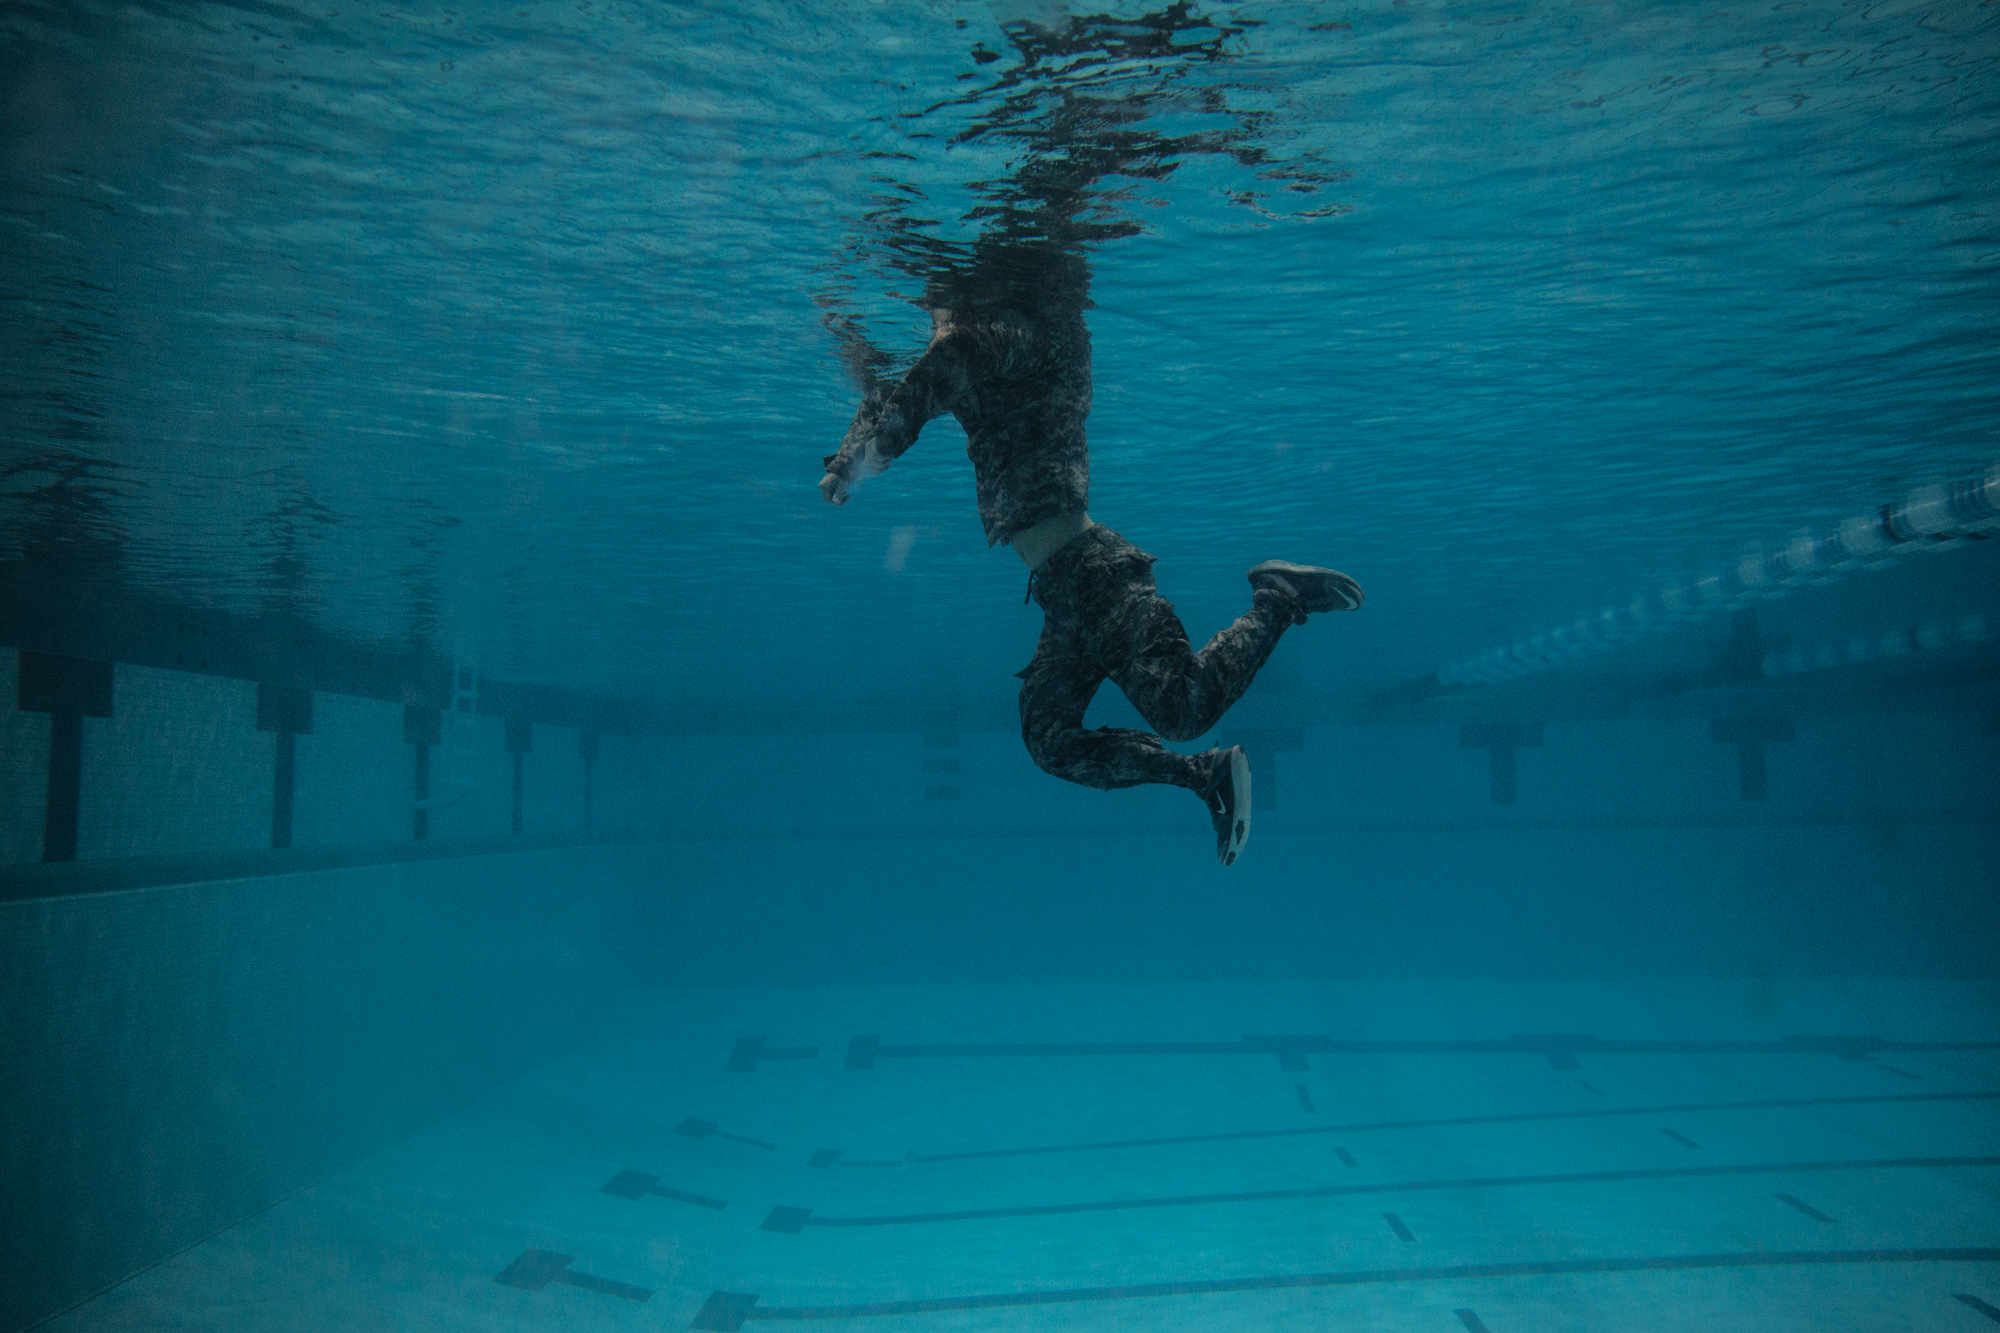  Another part of the combat swim test is showing the ability to swim while fully clothed, including shoes, for an extended period of time. The idea behind the swim test is to prepare cadets with the possibility of water-involved situations they may f